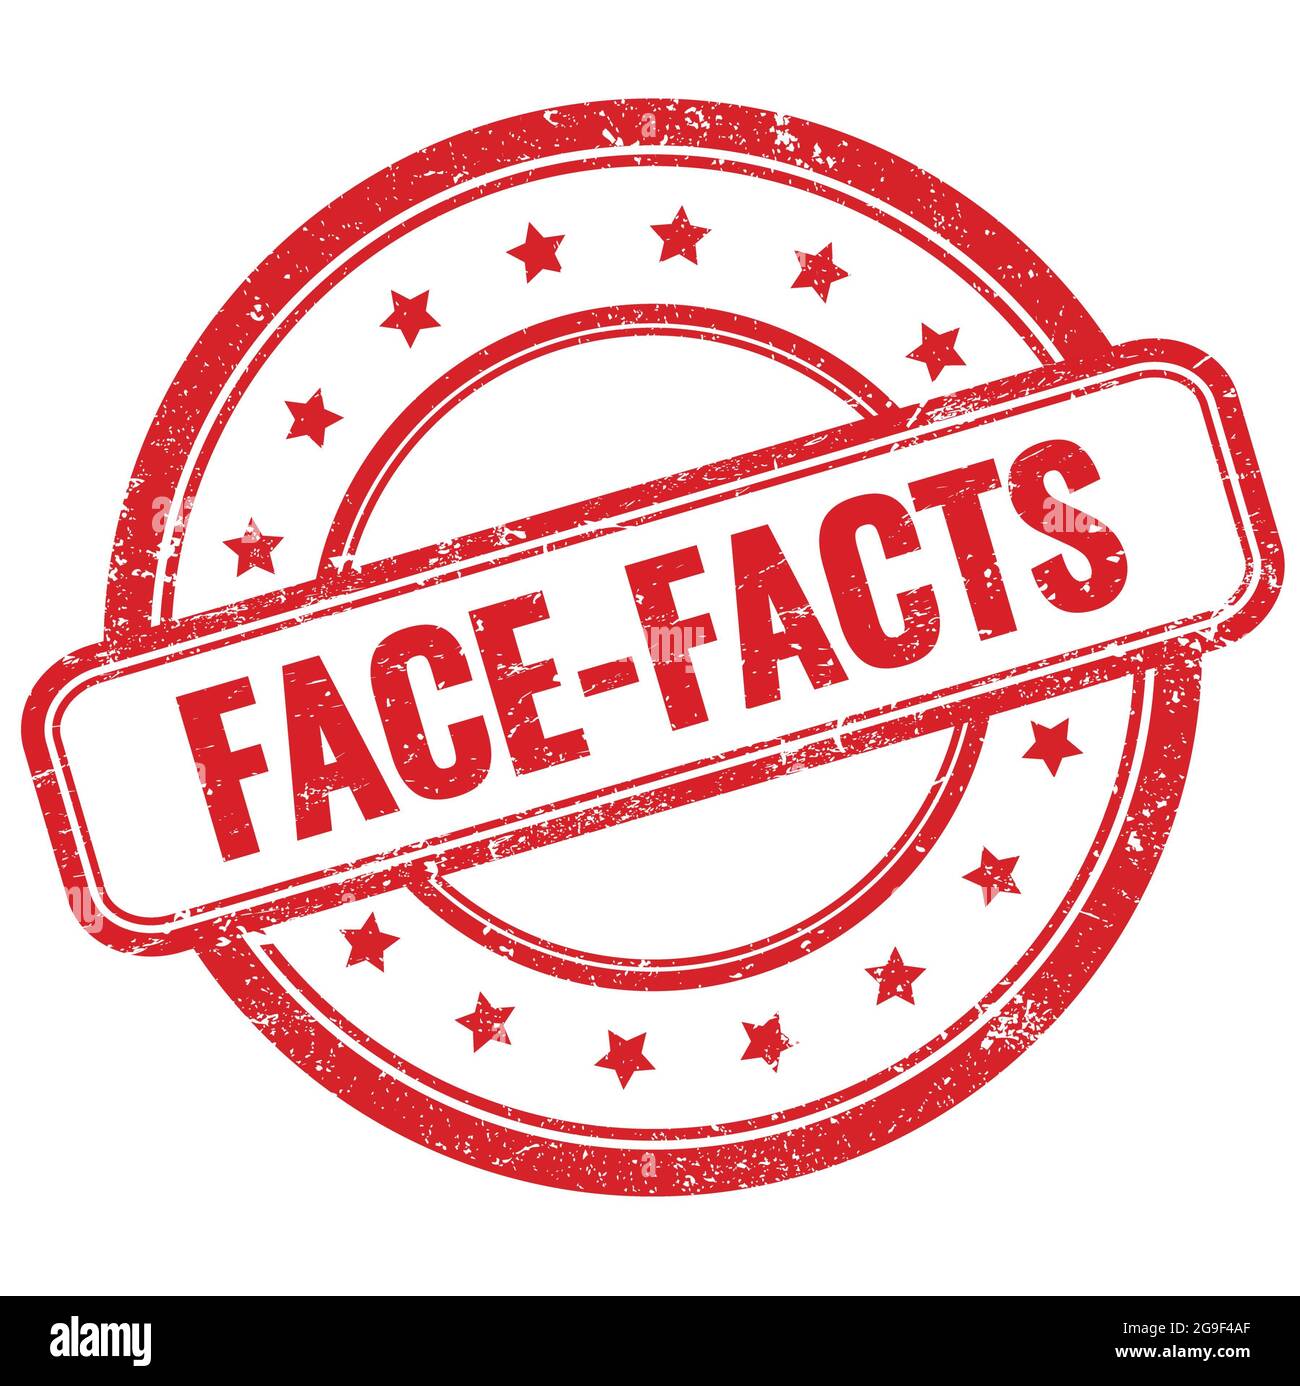 FACE-FACTS text on red vintage grungy round rubber stamp. Stock Photo